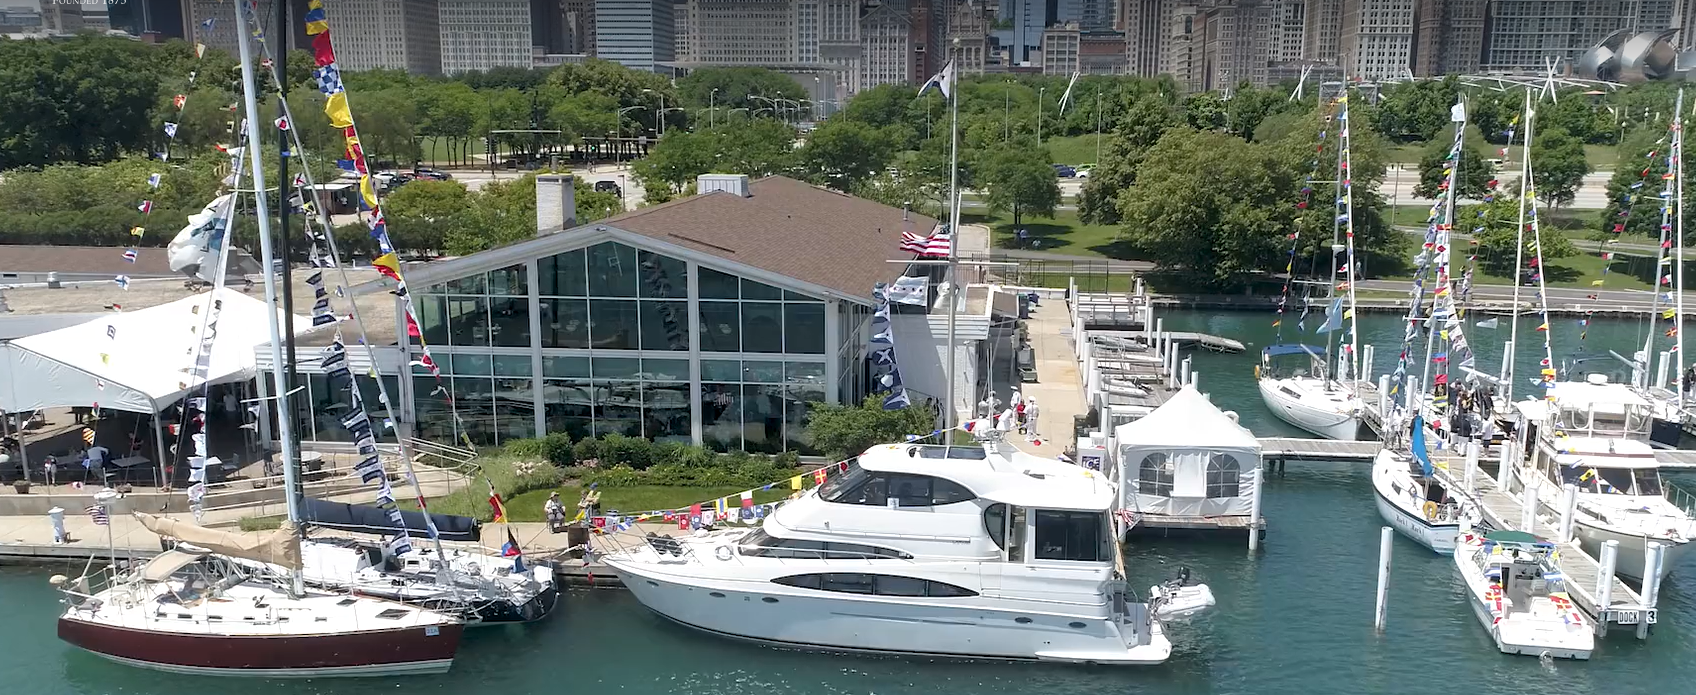 Airwaves Career News: On the Water Director – Chicago Yacht Club